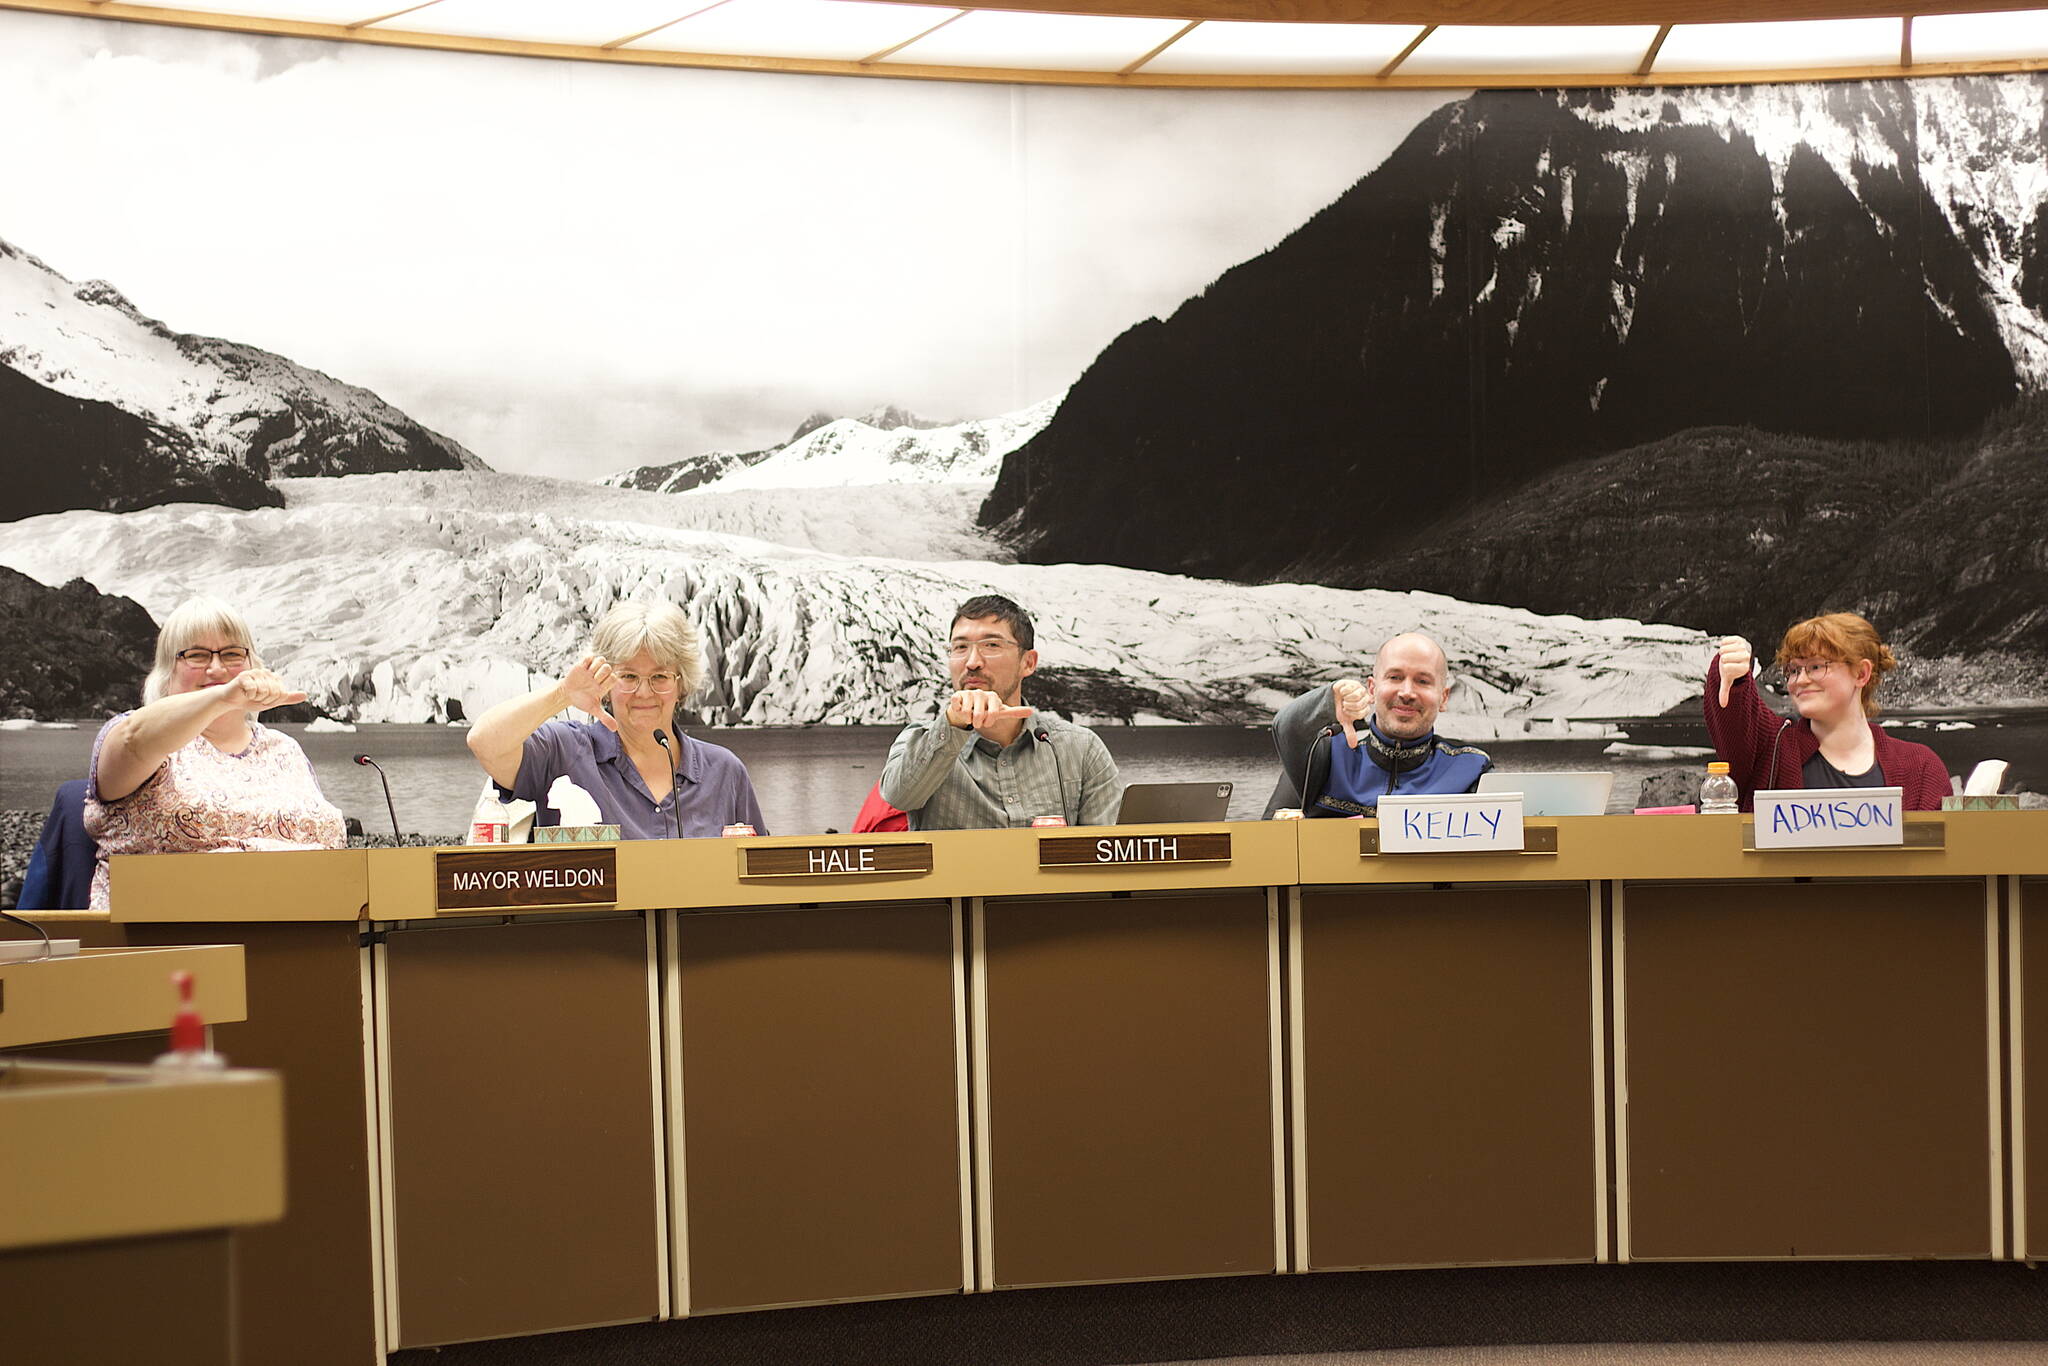 Juneau Assembly members cast an informal vote during a Committee of the Whole meeting Monday night about the volume of cruise tourism they want to see in Juneau in future years. Mayor Beth Weldon (left) and Assembly member Greg Smith (middle) cast neutral votes essentially favoring an as-is approach, while Paul Kelly and Ella Adkison suggesting they prefer lower numbers than the record 1.66 million passengers that visited this year. Votes by the other four members included one as-is and three “thumbs down,” for a 6-3 vote in favor of the city’s tourism director exploring a strategy for 2026 and beyond that results in fewer annual cruise visitors. (Mark Sabbatini / Juneau Empire)